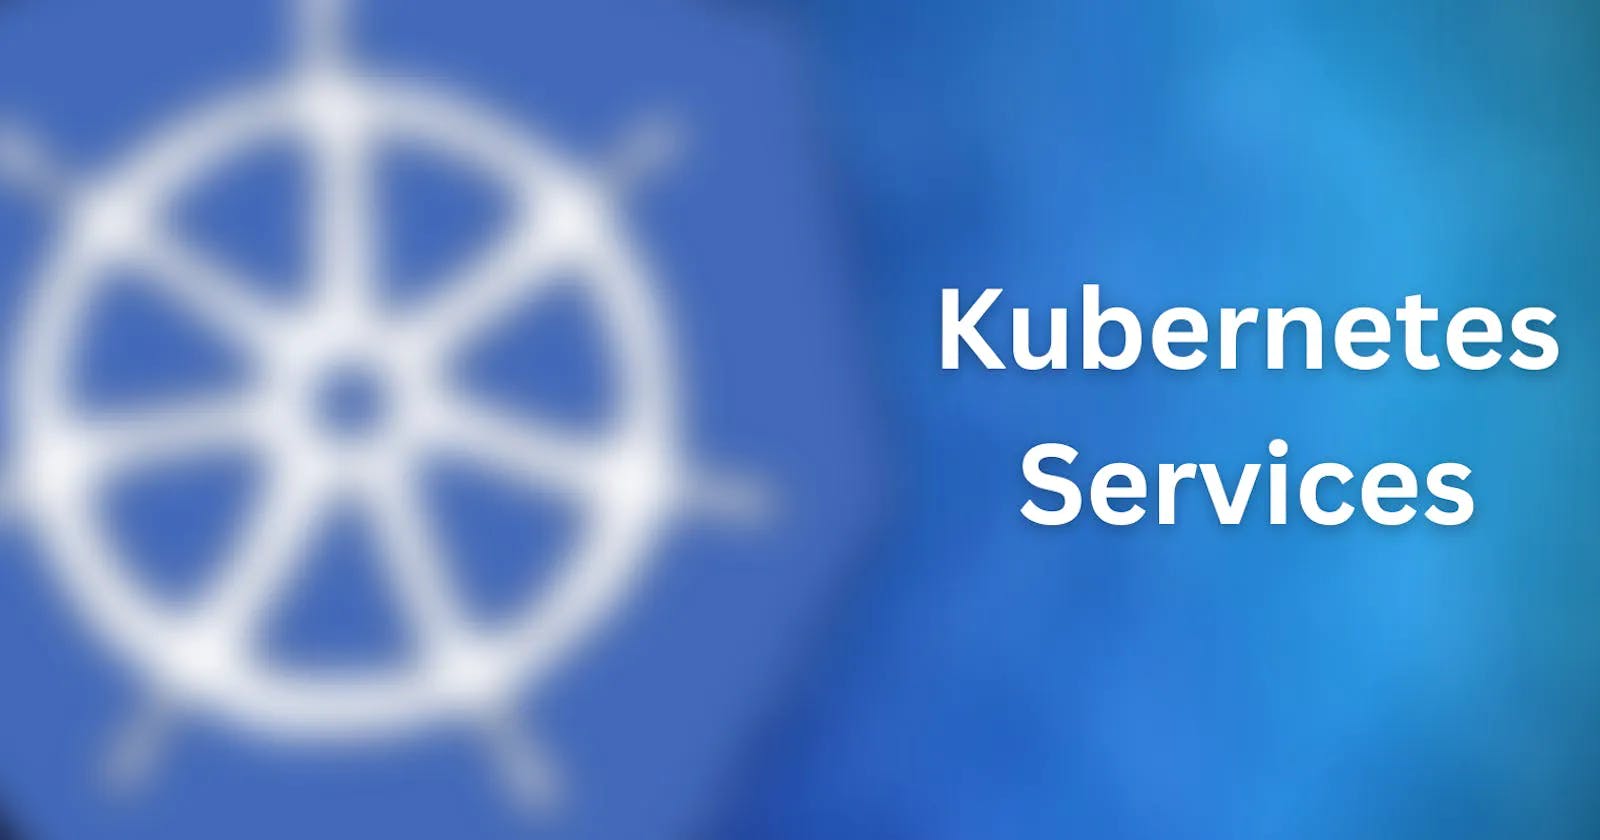 Kubernetes Services: Your way to connect with your application